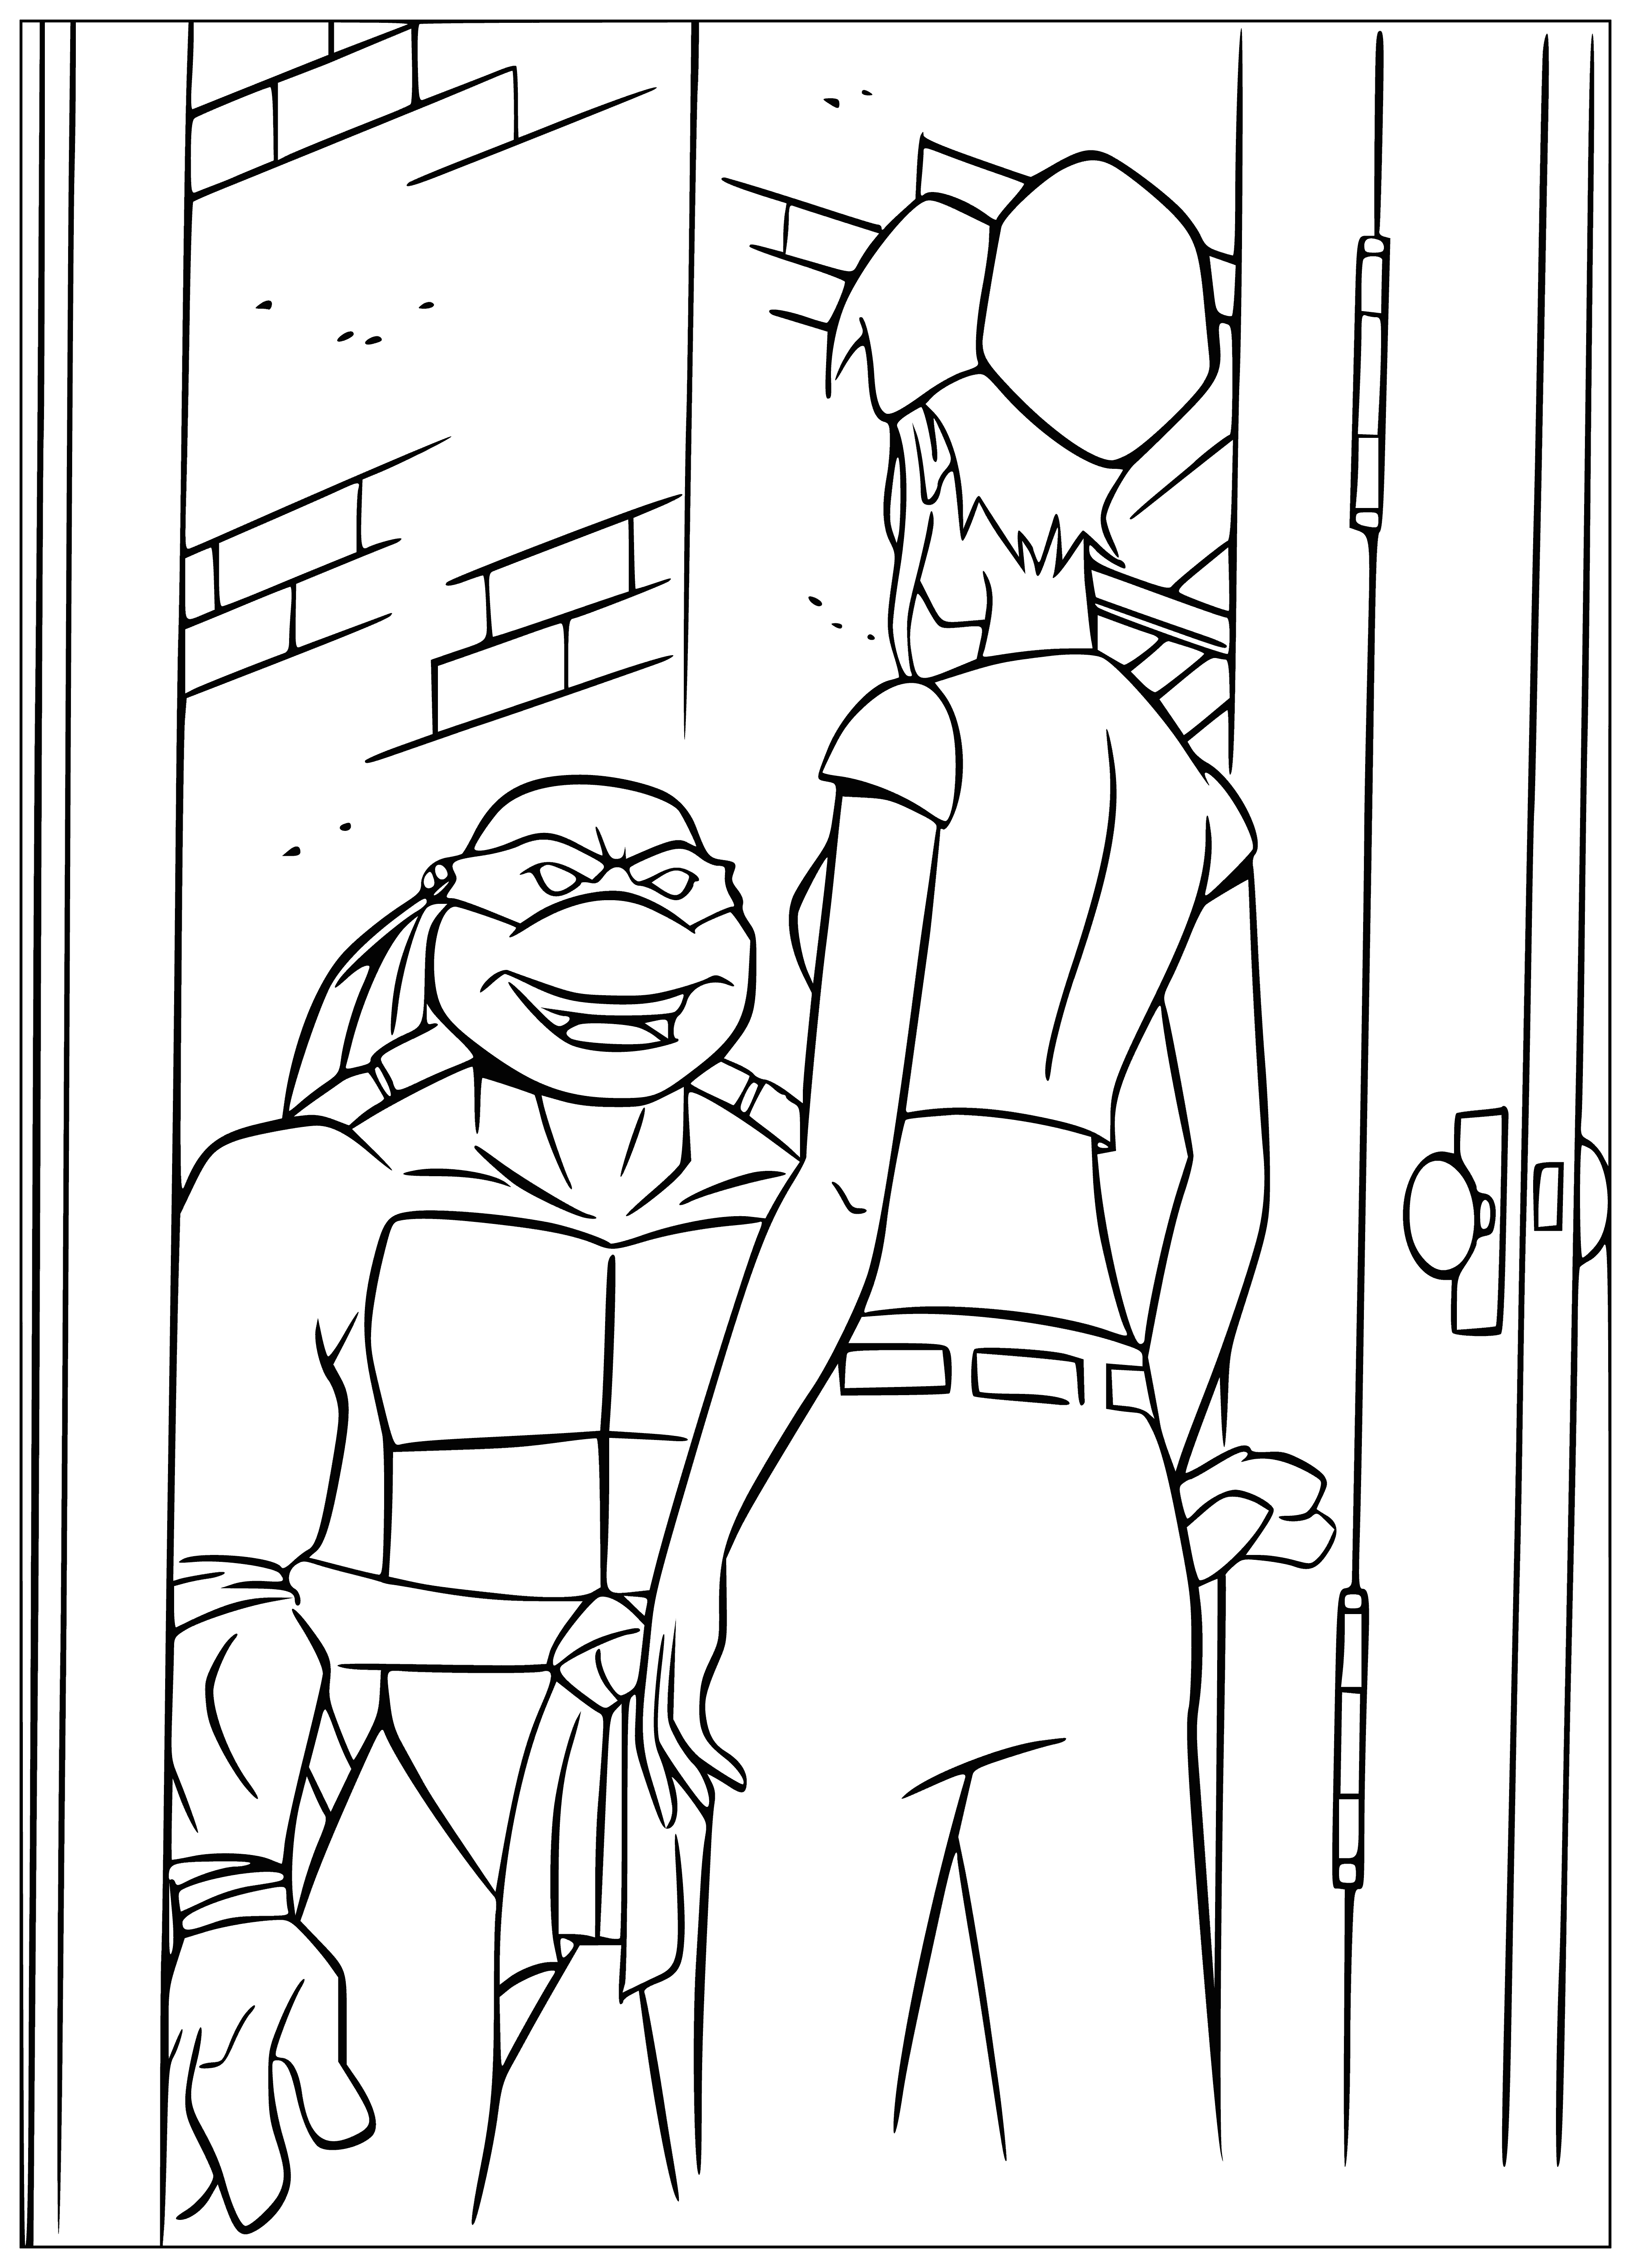 coloring page: Teenage Mutant Ninja Turtles are four mutated turtle superheroes that fight crime in NYC. Led by Rat Splinter, they are each named after a Renaissance artist & have unique personalities & fighting styles.Battle evil Foot Clan and their leader, Shredder.